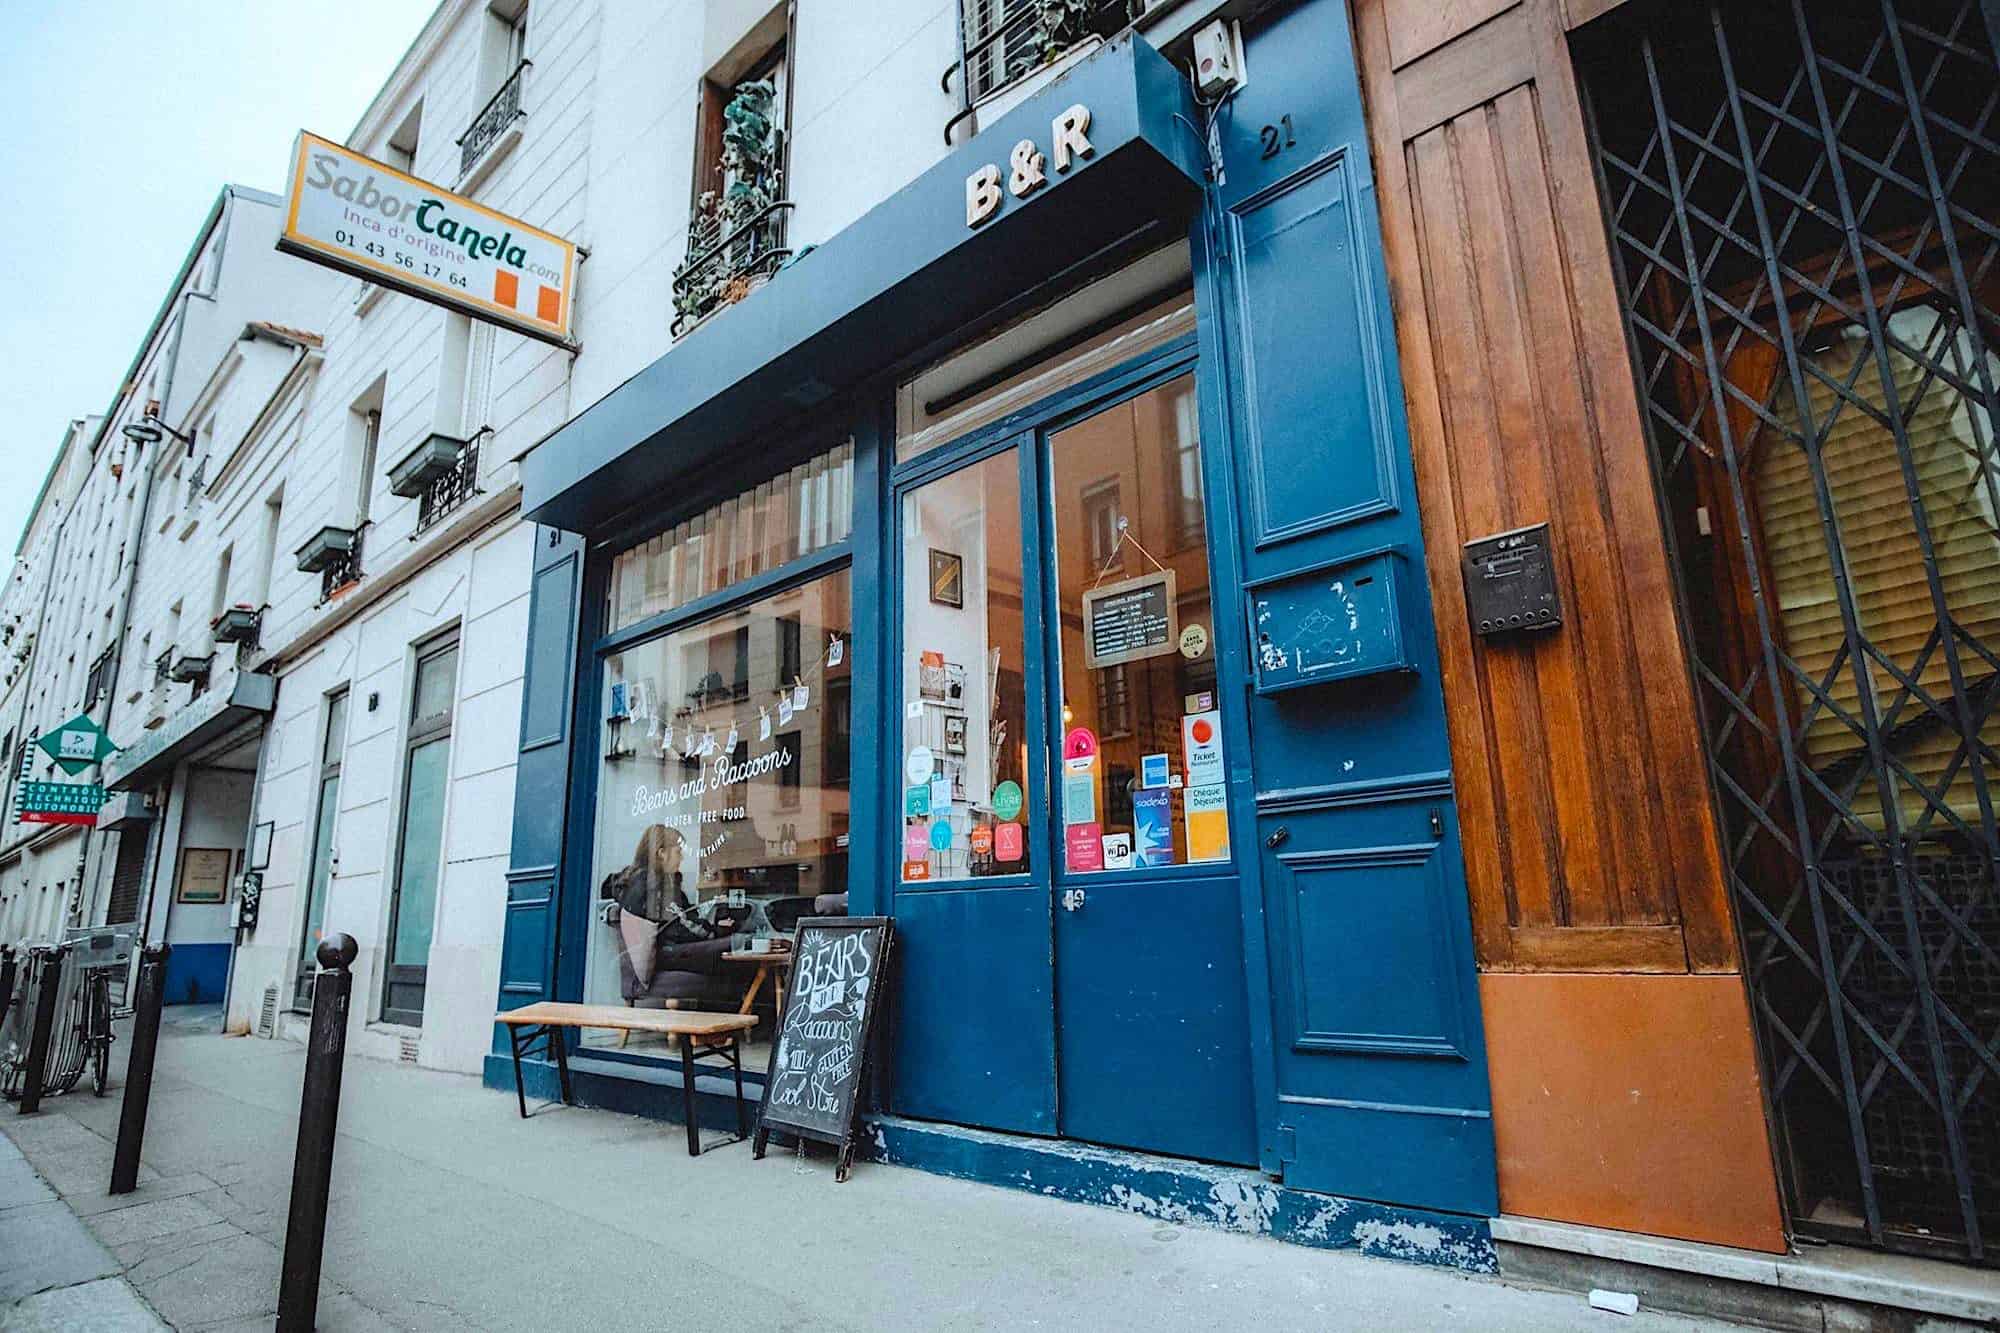 Outside Bears and Racoons gluten-free restaurant in Paris and its blue shop front.